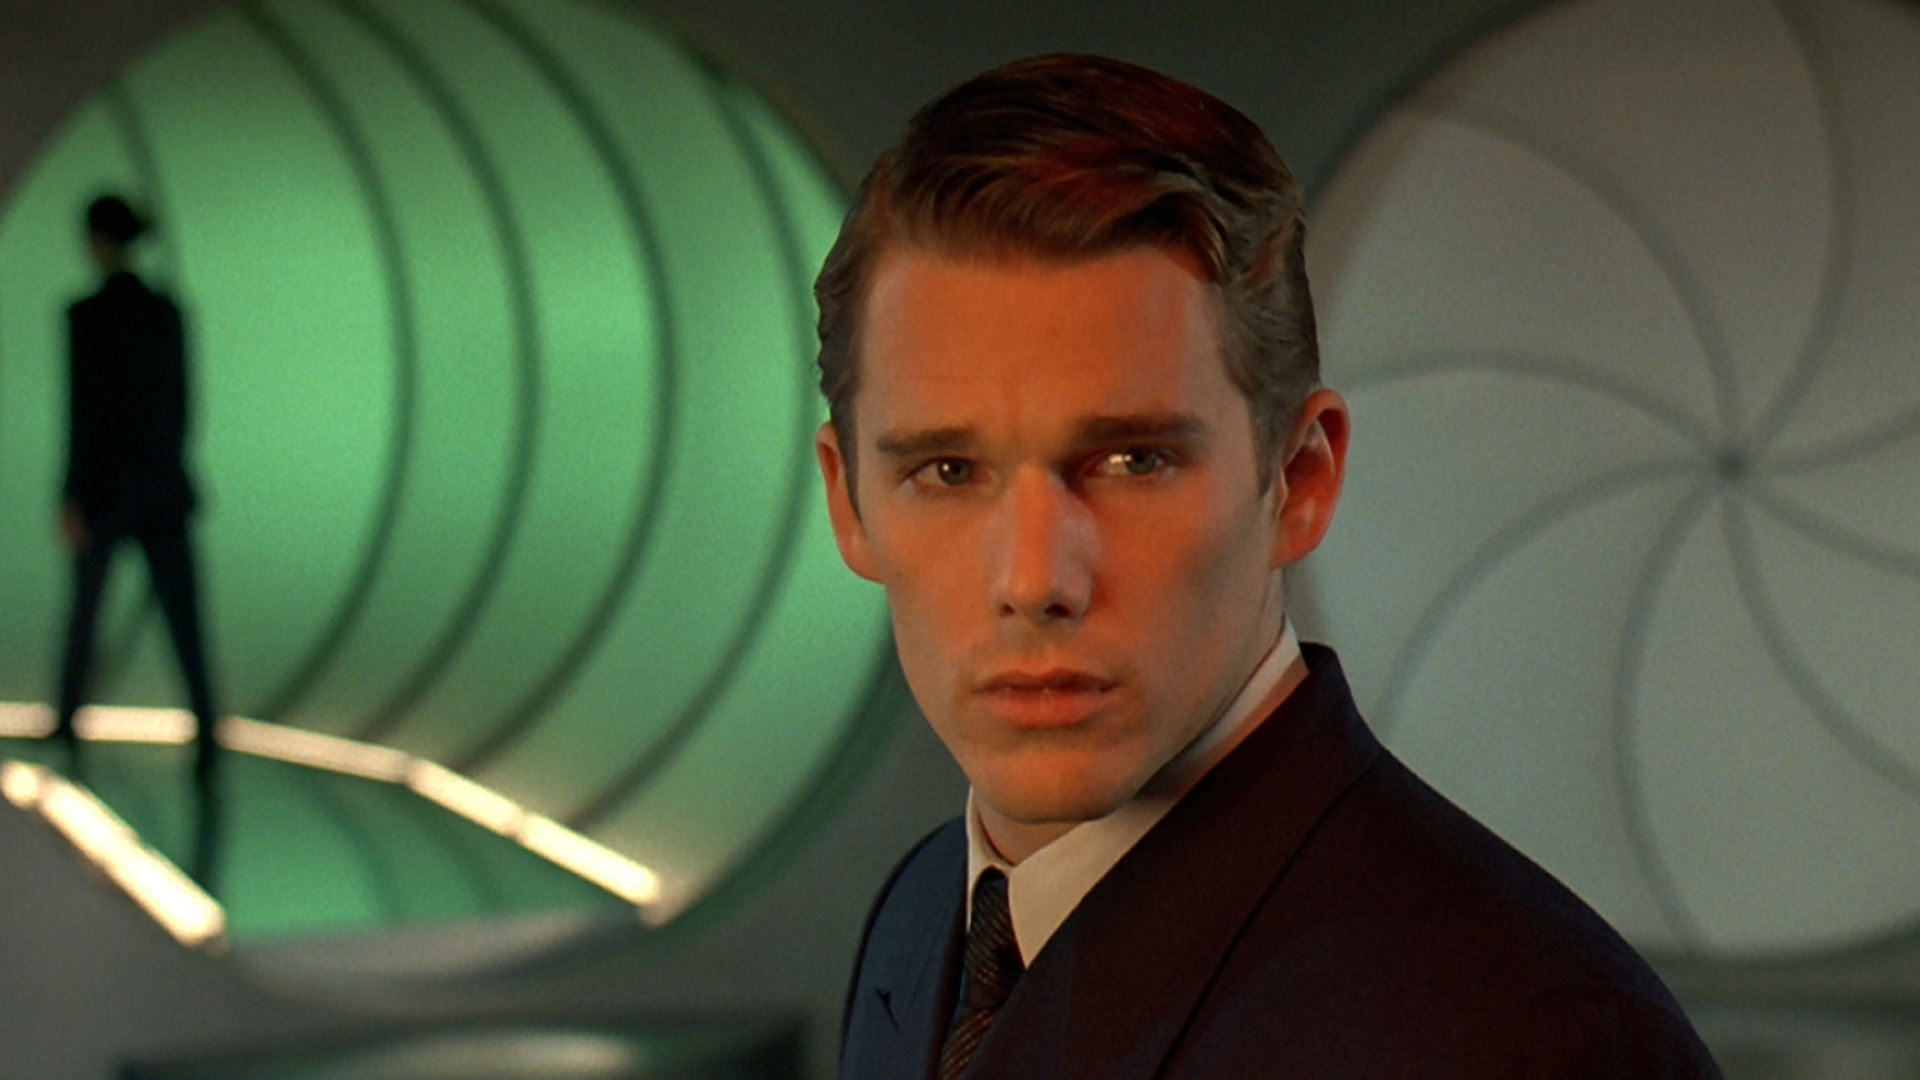 Gattaca: The film was released in theaters on October 24, 1997. 1920x1080 Full HD Wallpaper.